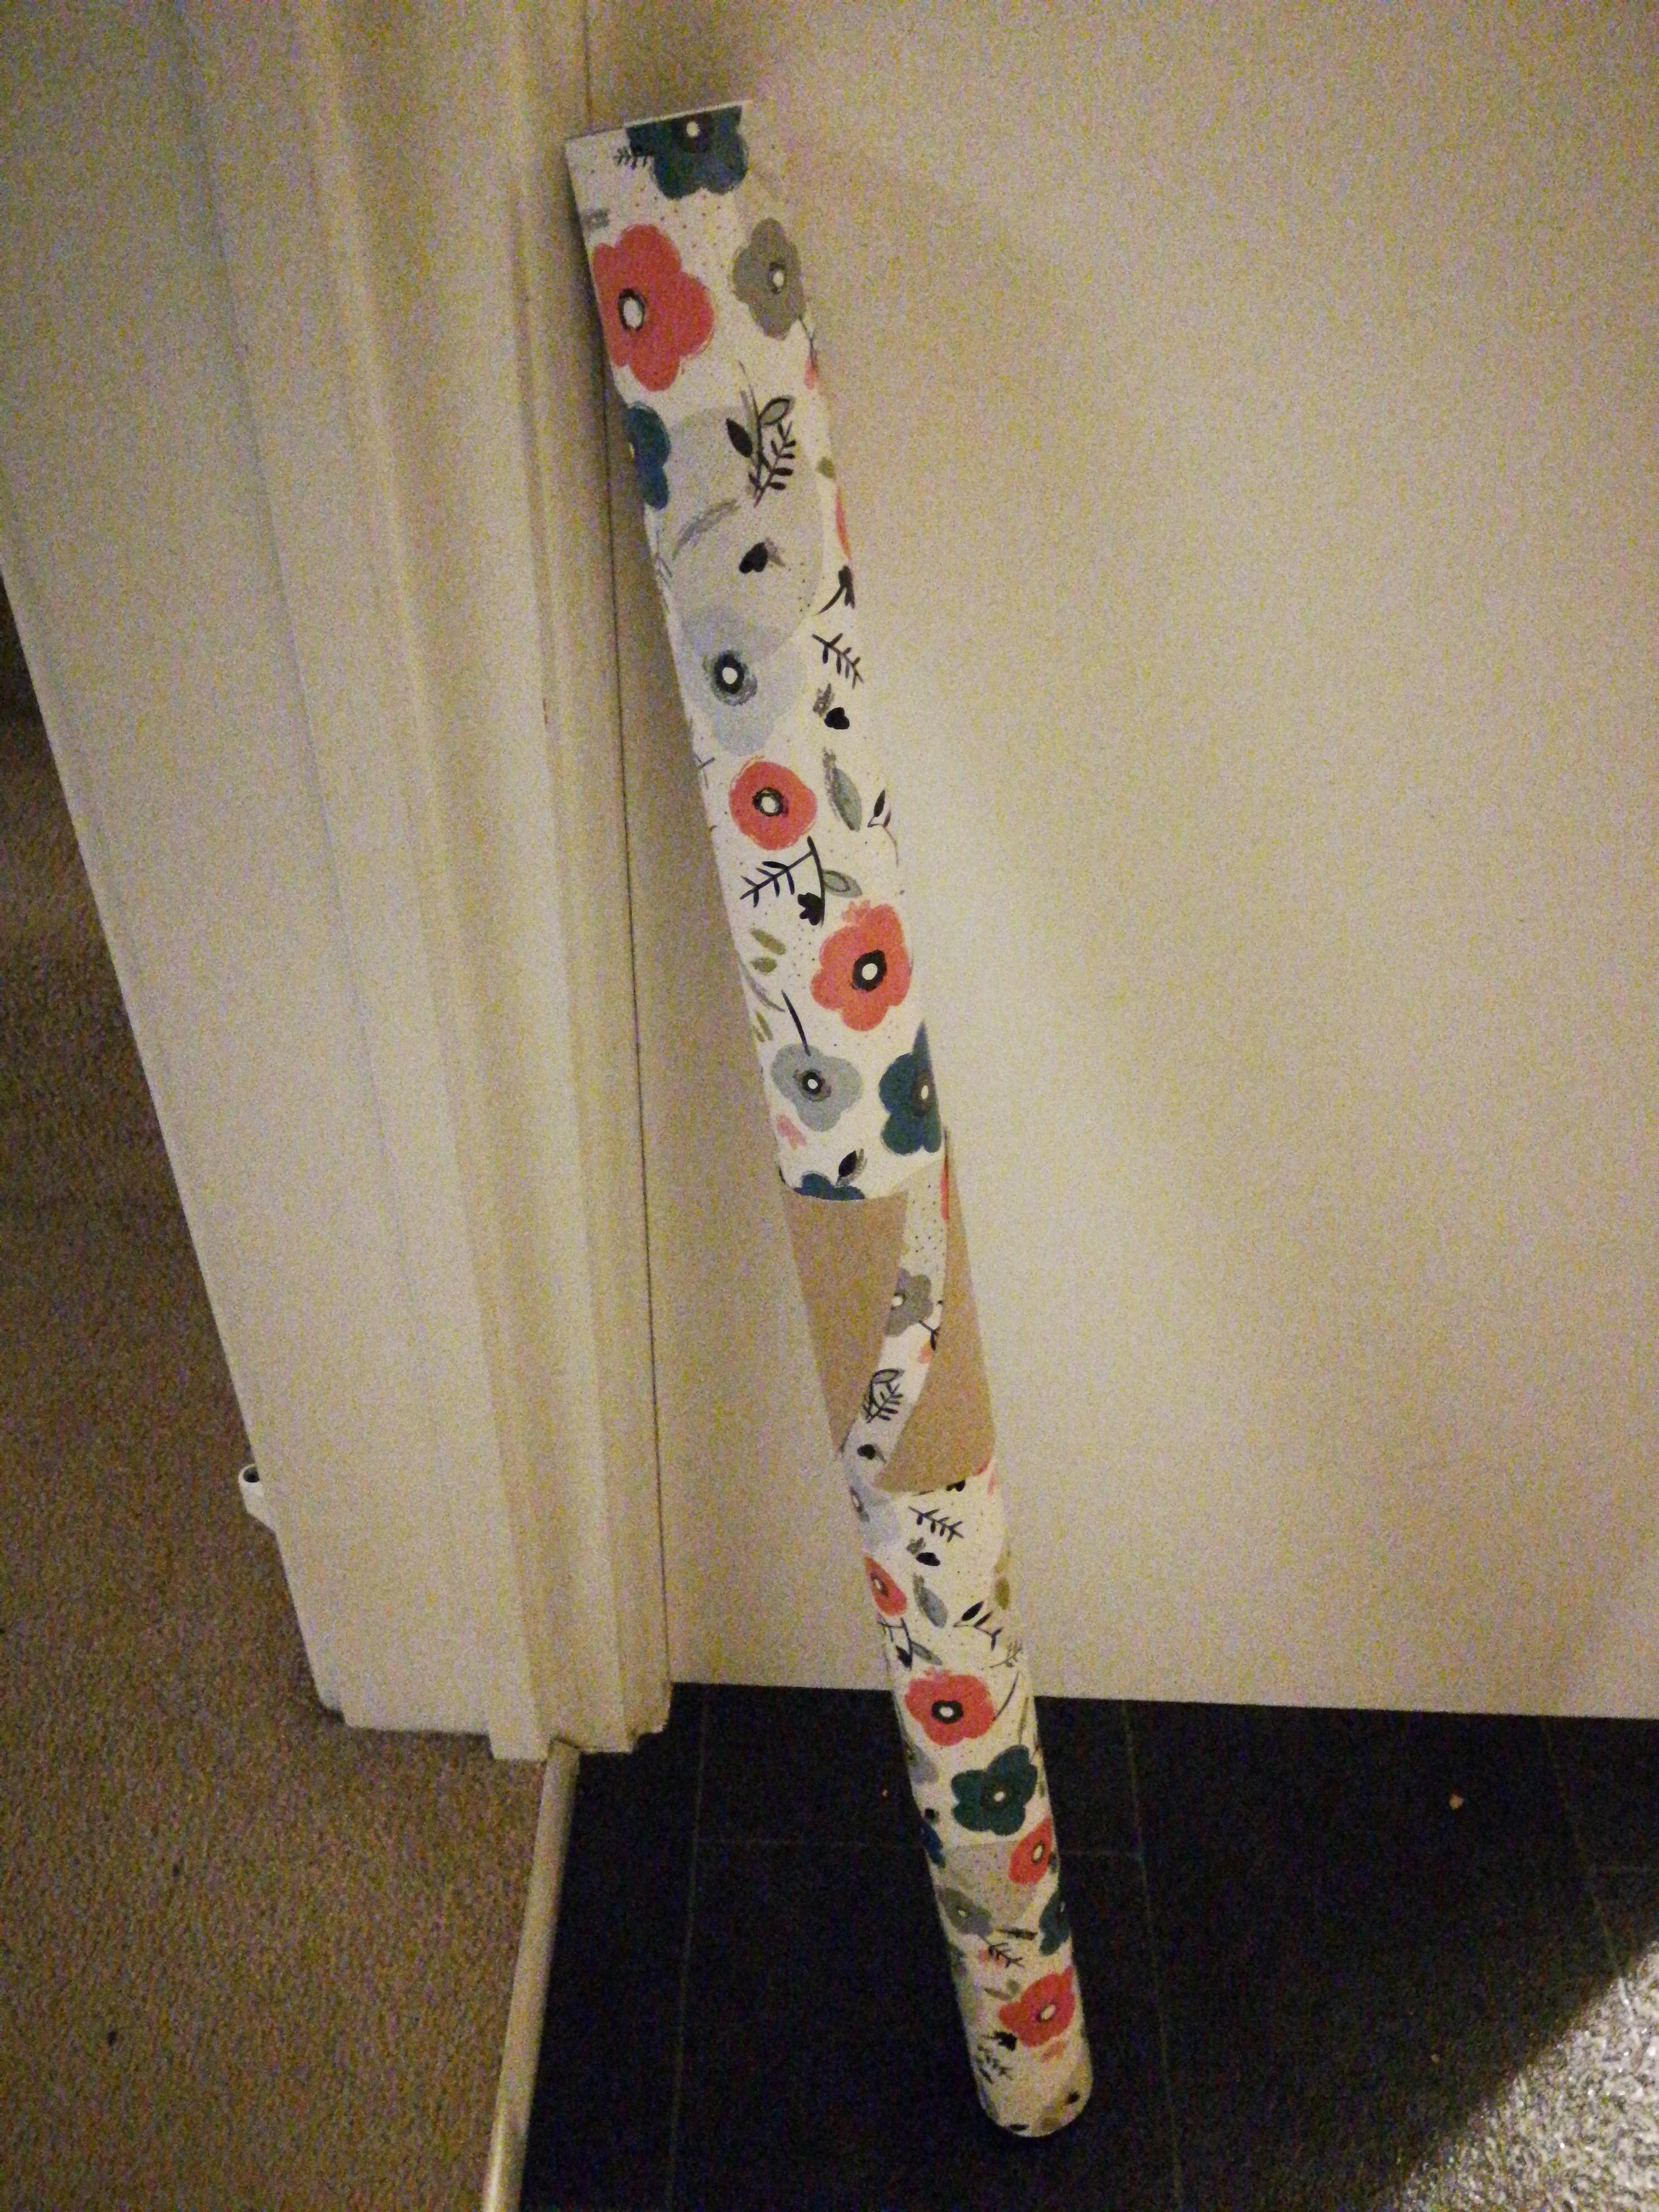 Placing an old toilet paper roll around a sheet of wrapping paper is a great way to keep things neat.